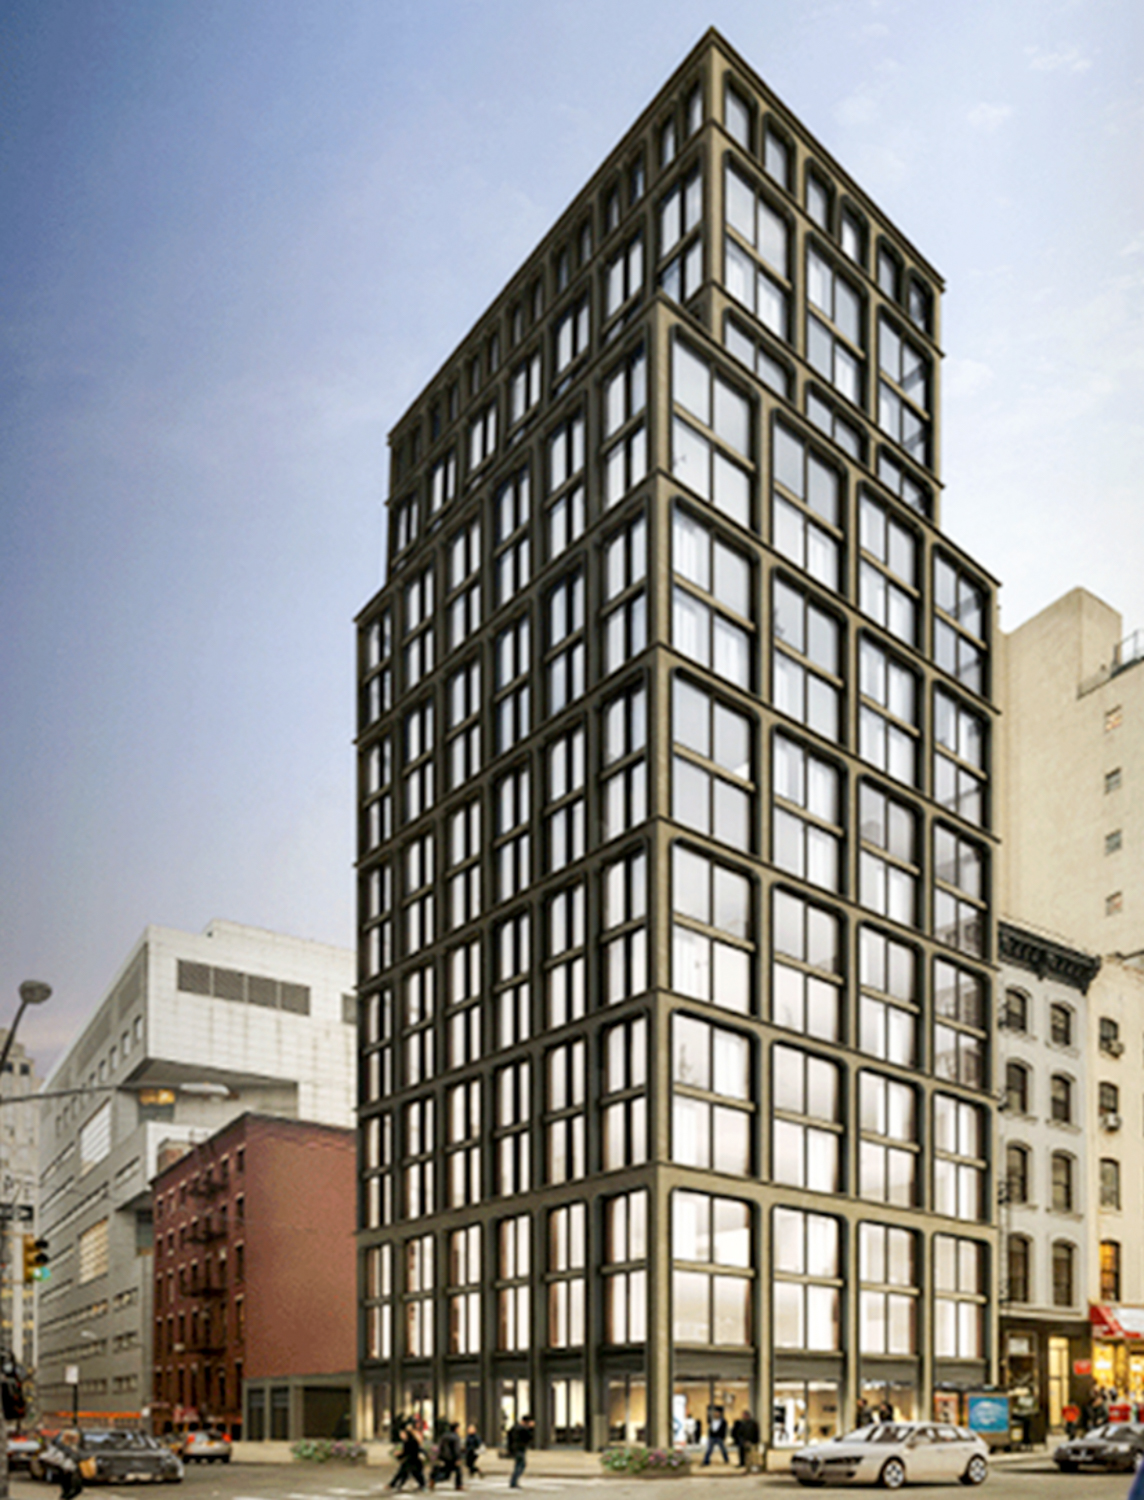 65 Franklin Street, rendering from The Real Deal